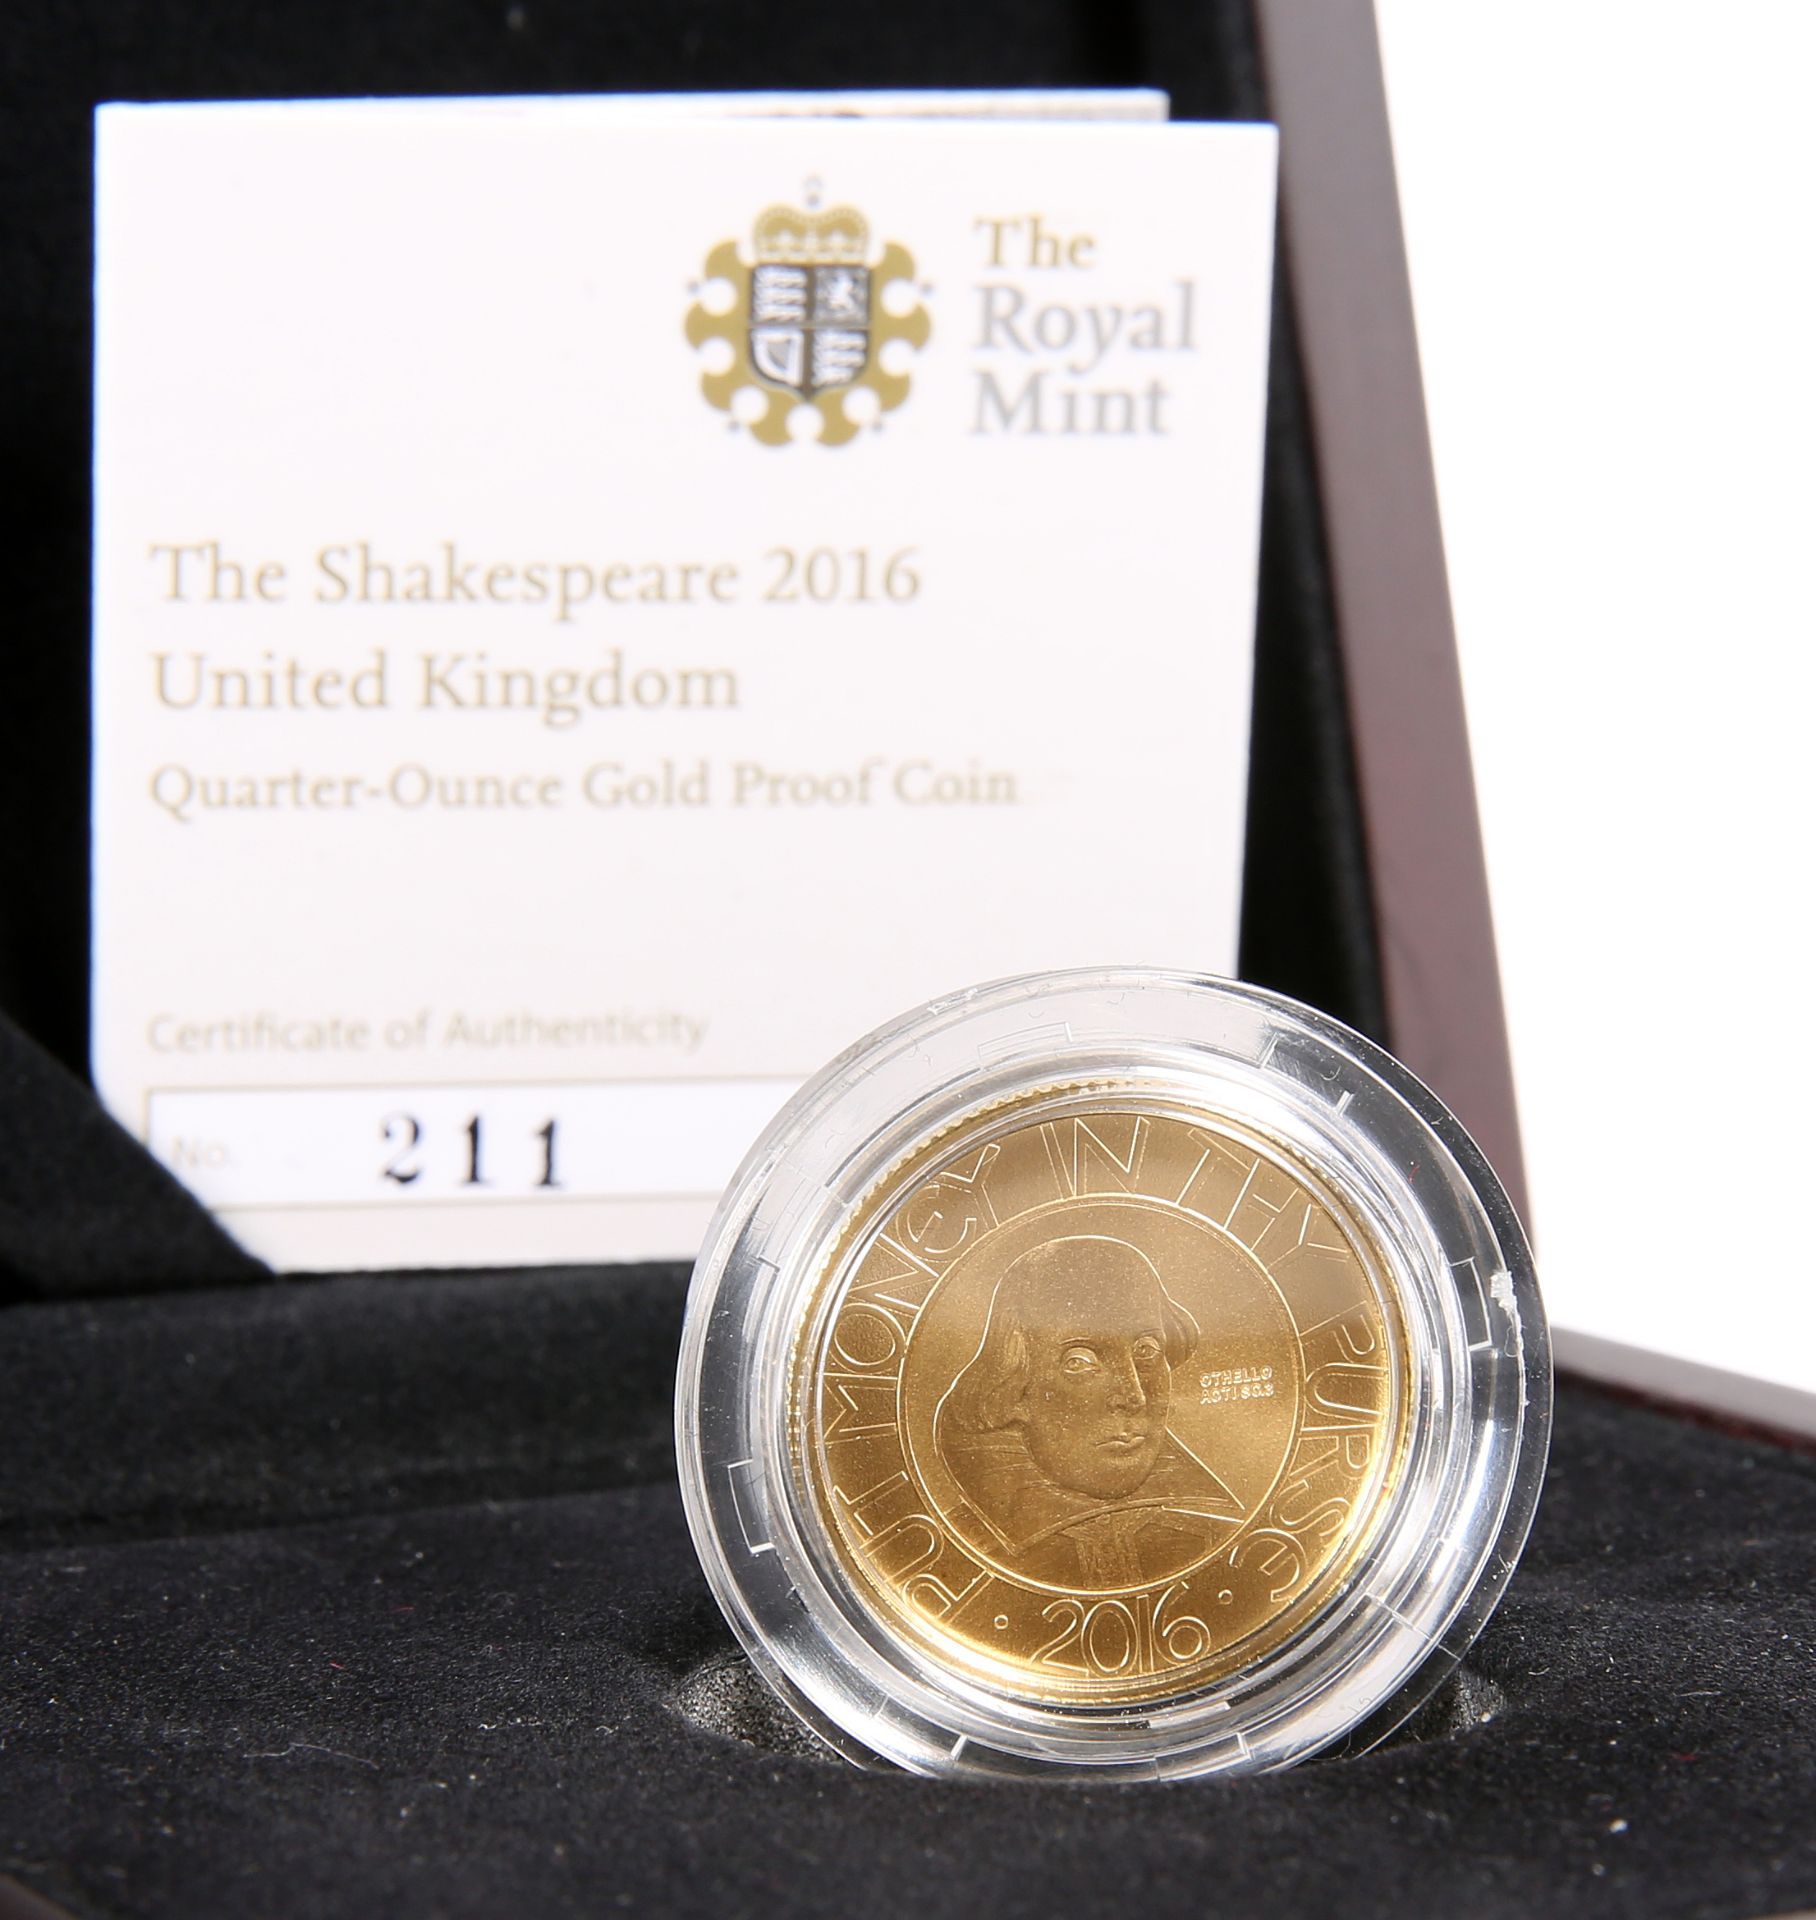 A ROYAL MINT QUARTER-OUNCE GOLD PROOF COIN, "THE SHAKESPEARE 2016", boxed with COA no. 211